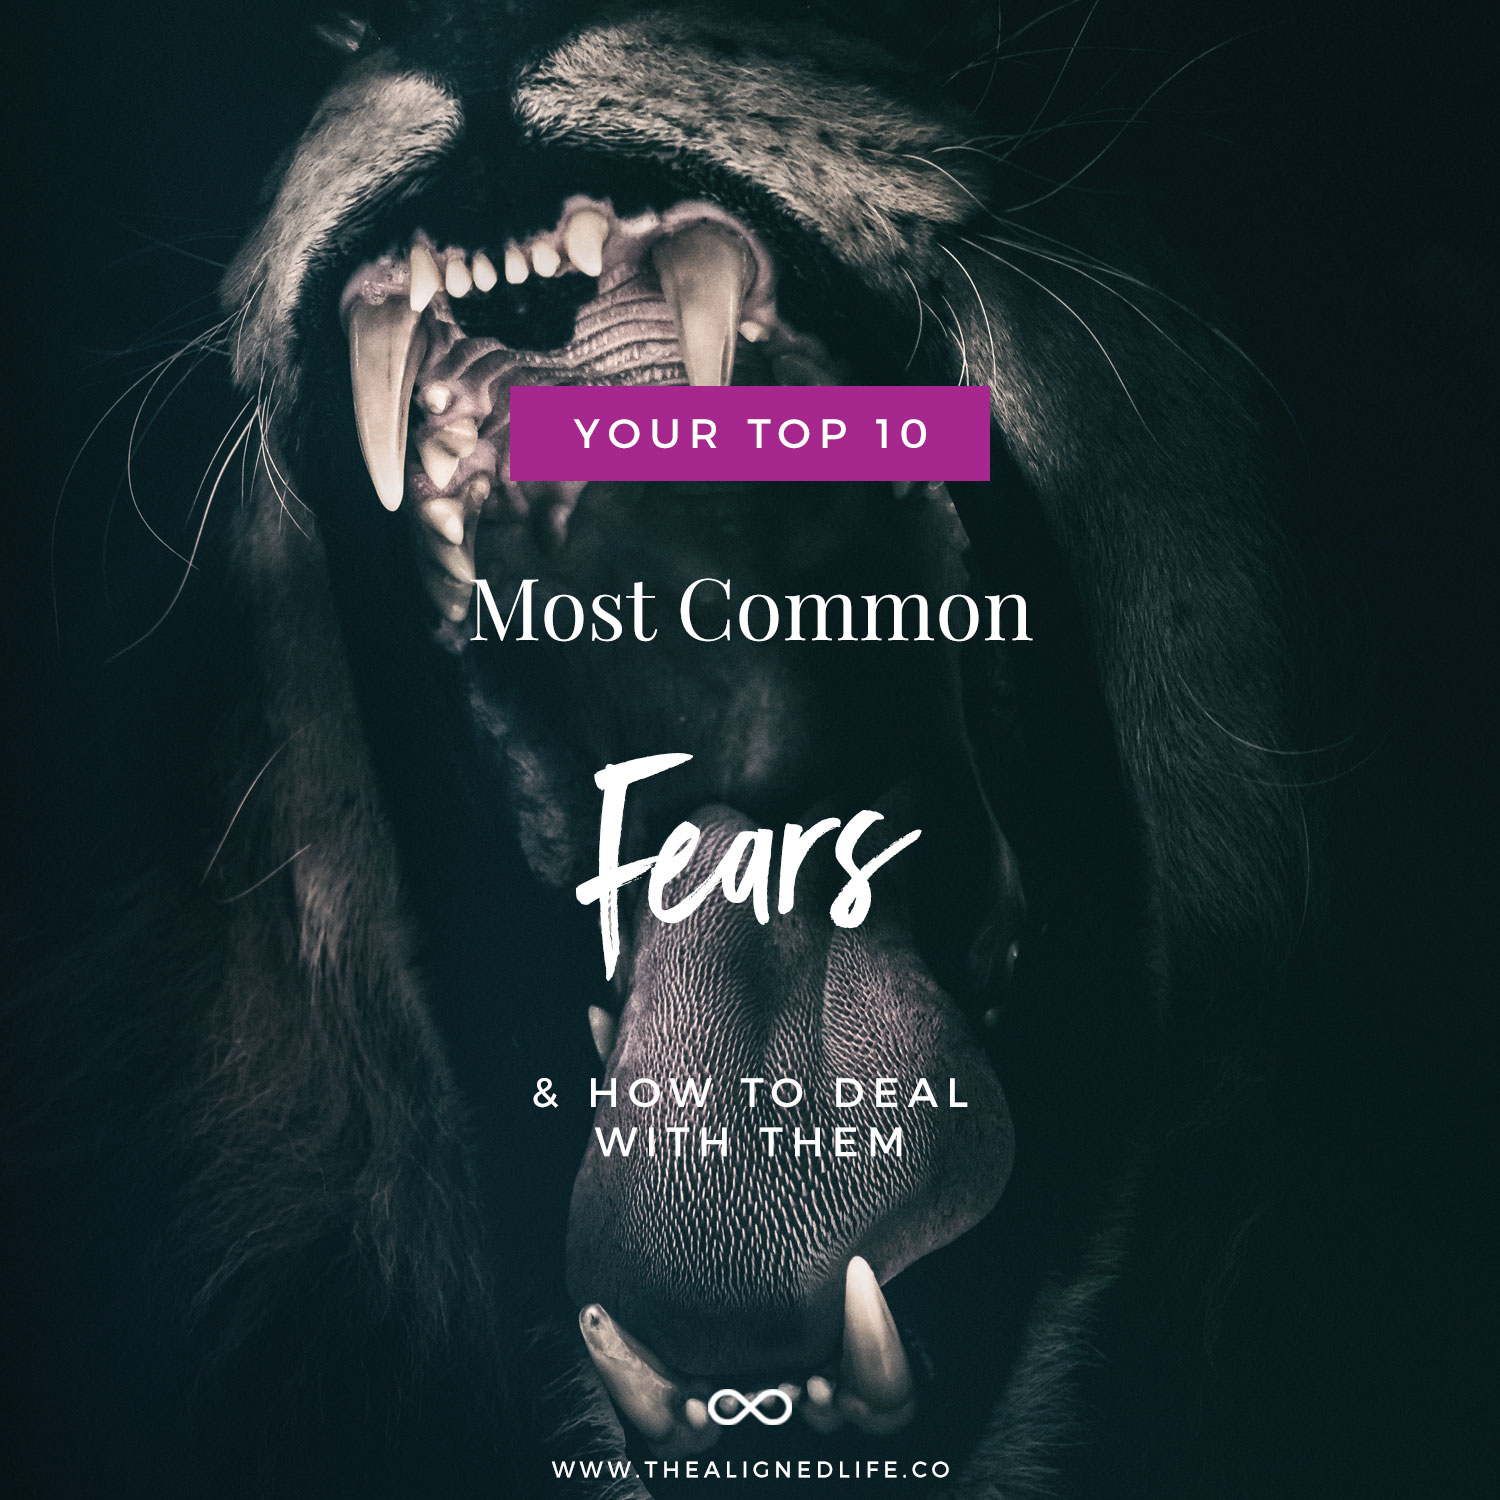 Your 10 Most Common Fears & How To Deal With Them